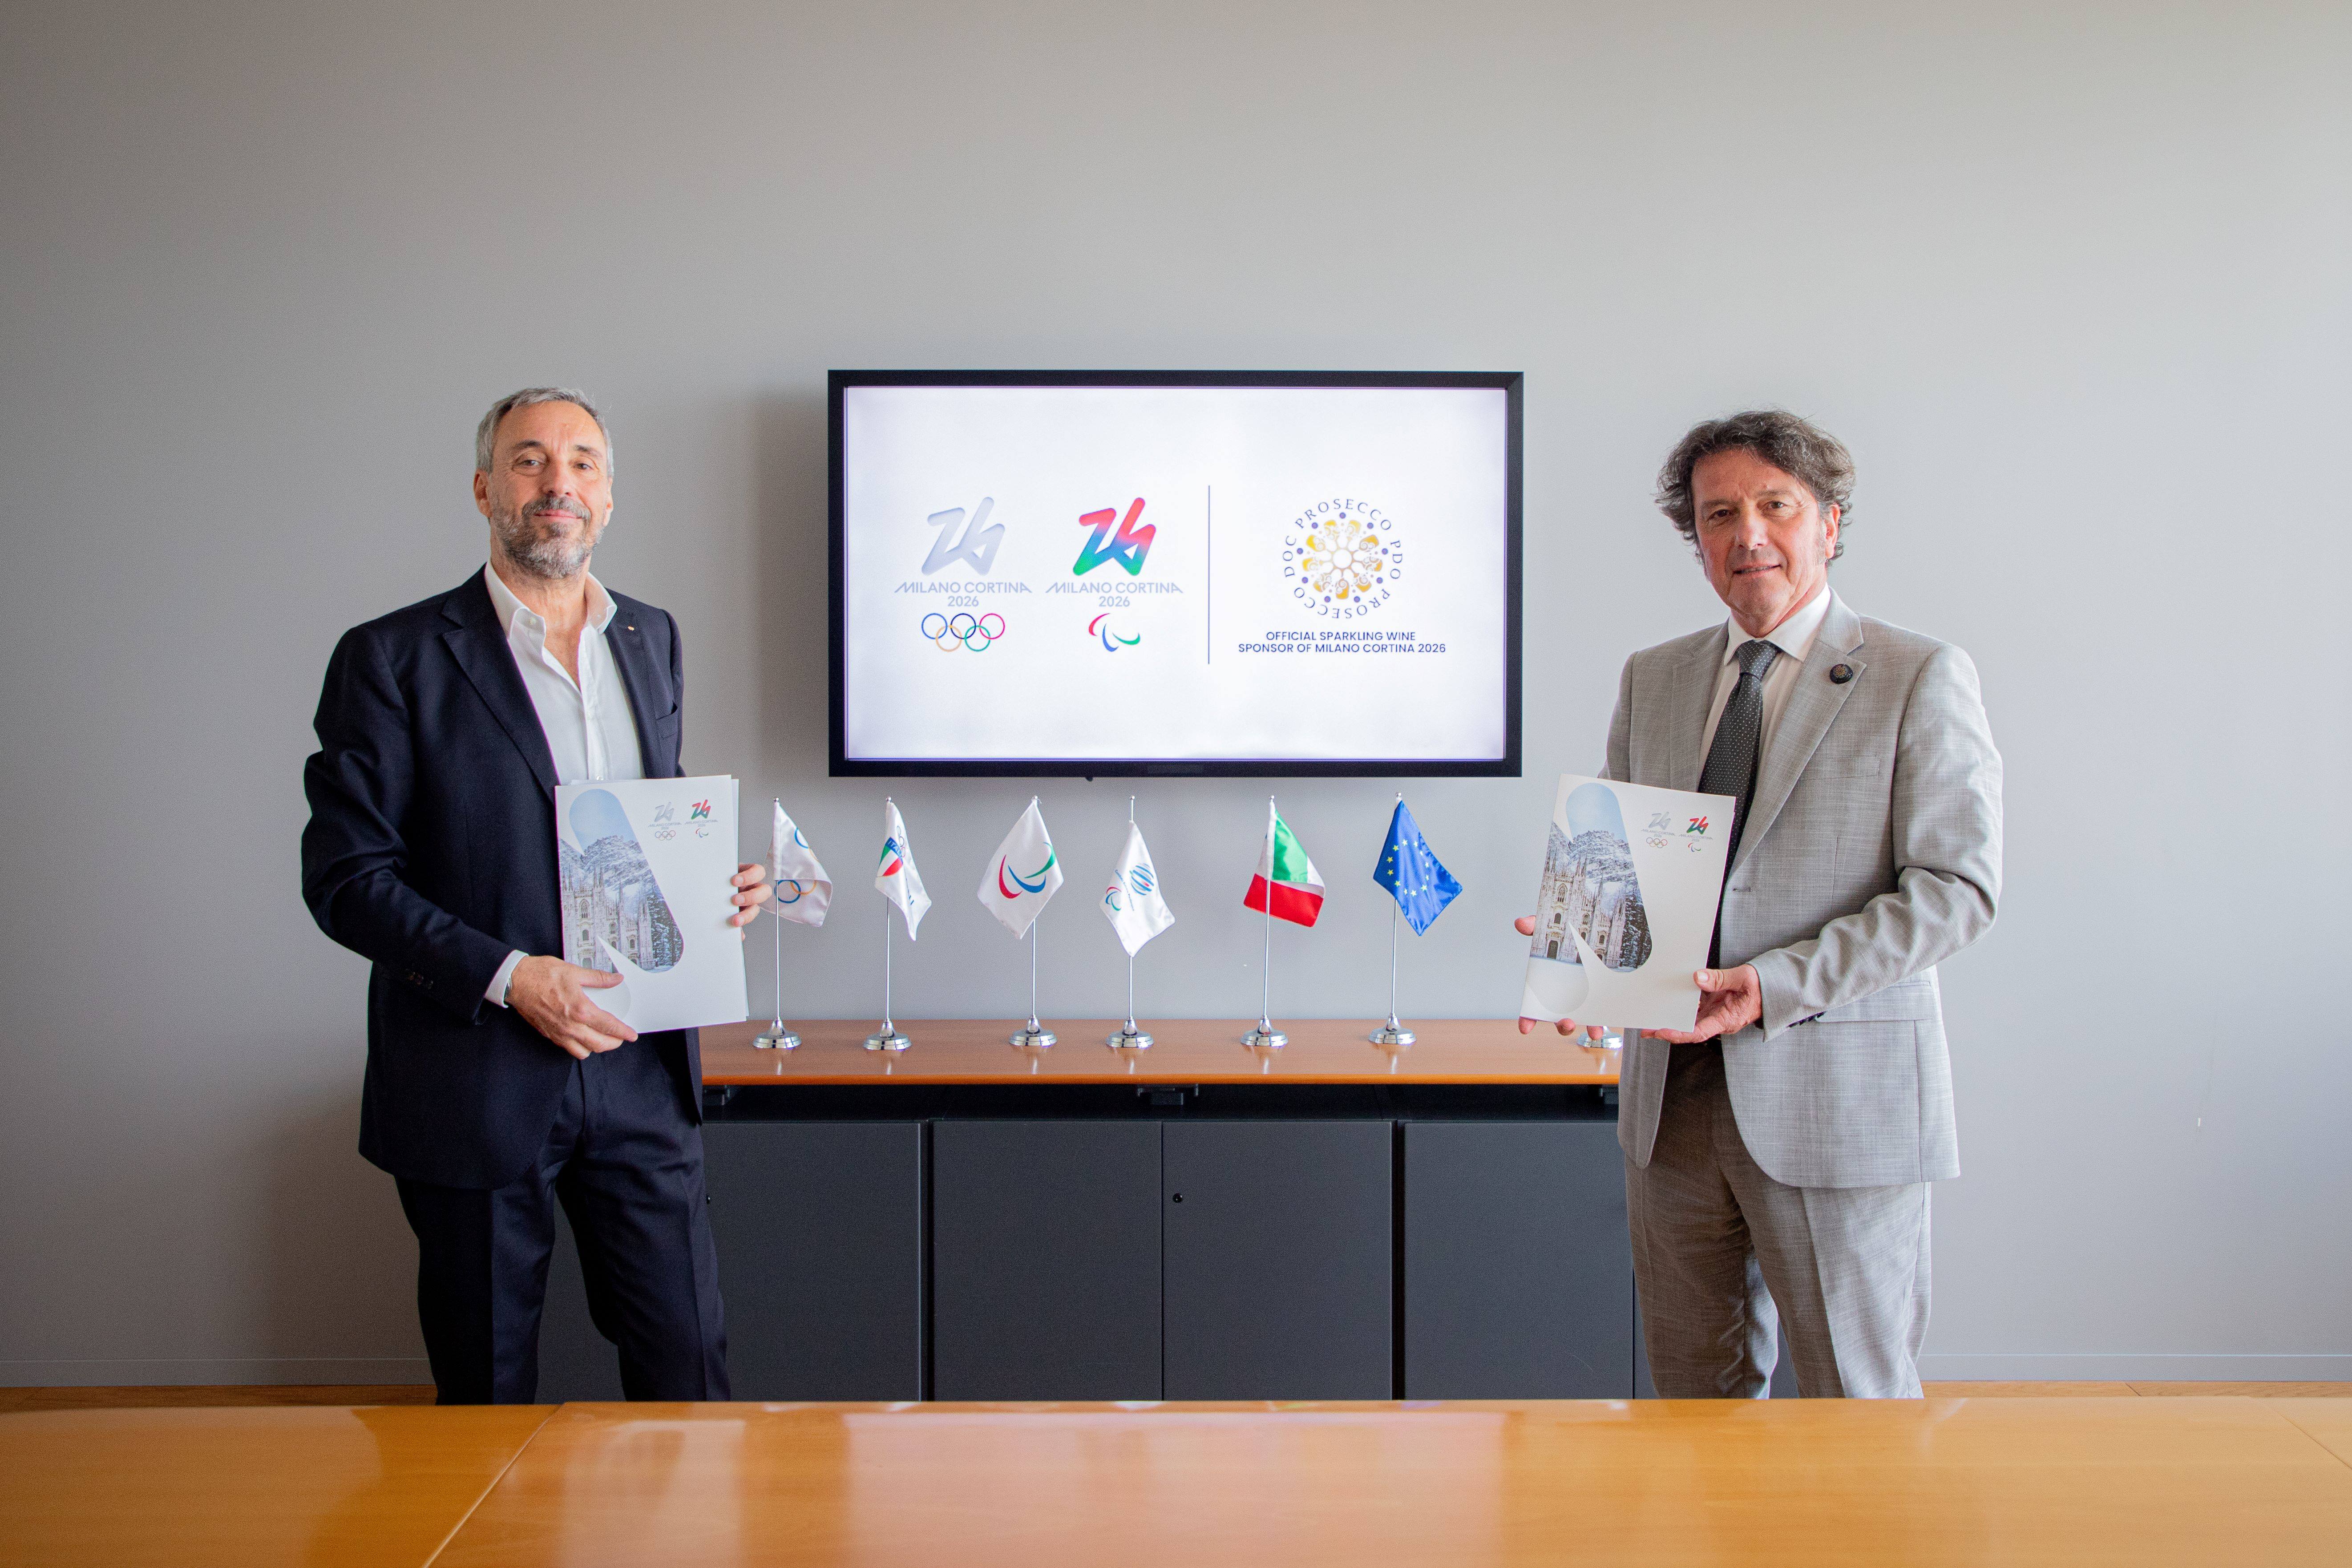 Photo by Andrea Varnier, CEO of Milan Cortina 2026 and Stefano Zanette, President of the Prosecco DOC Consortium 